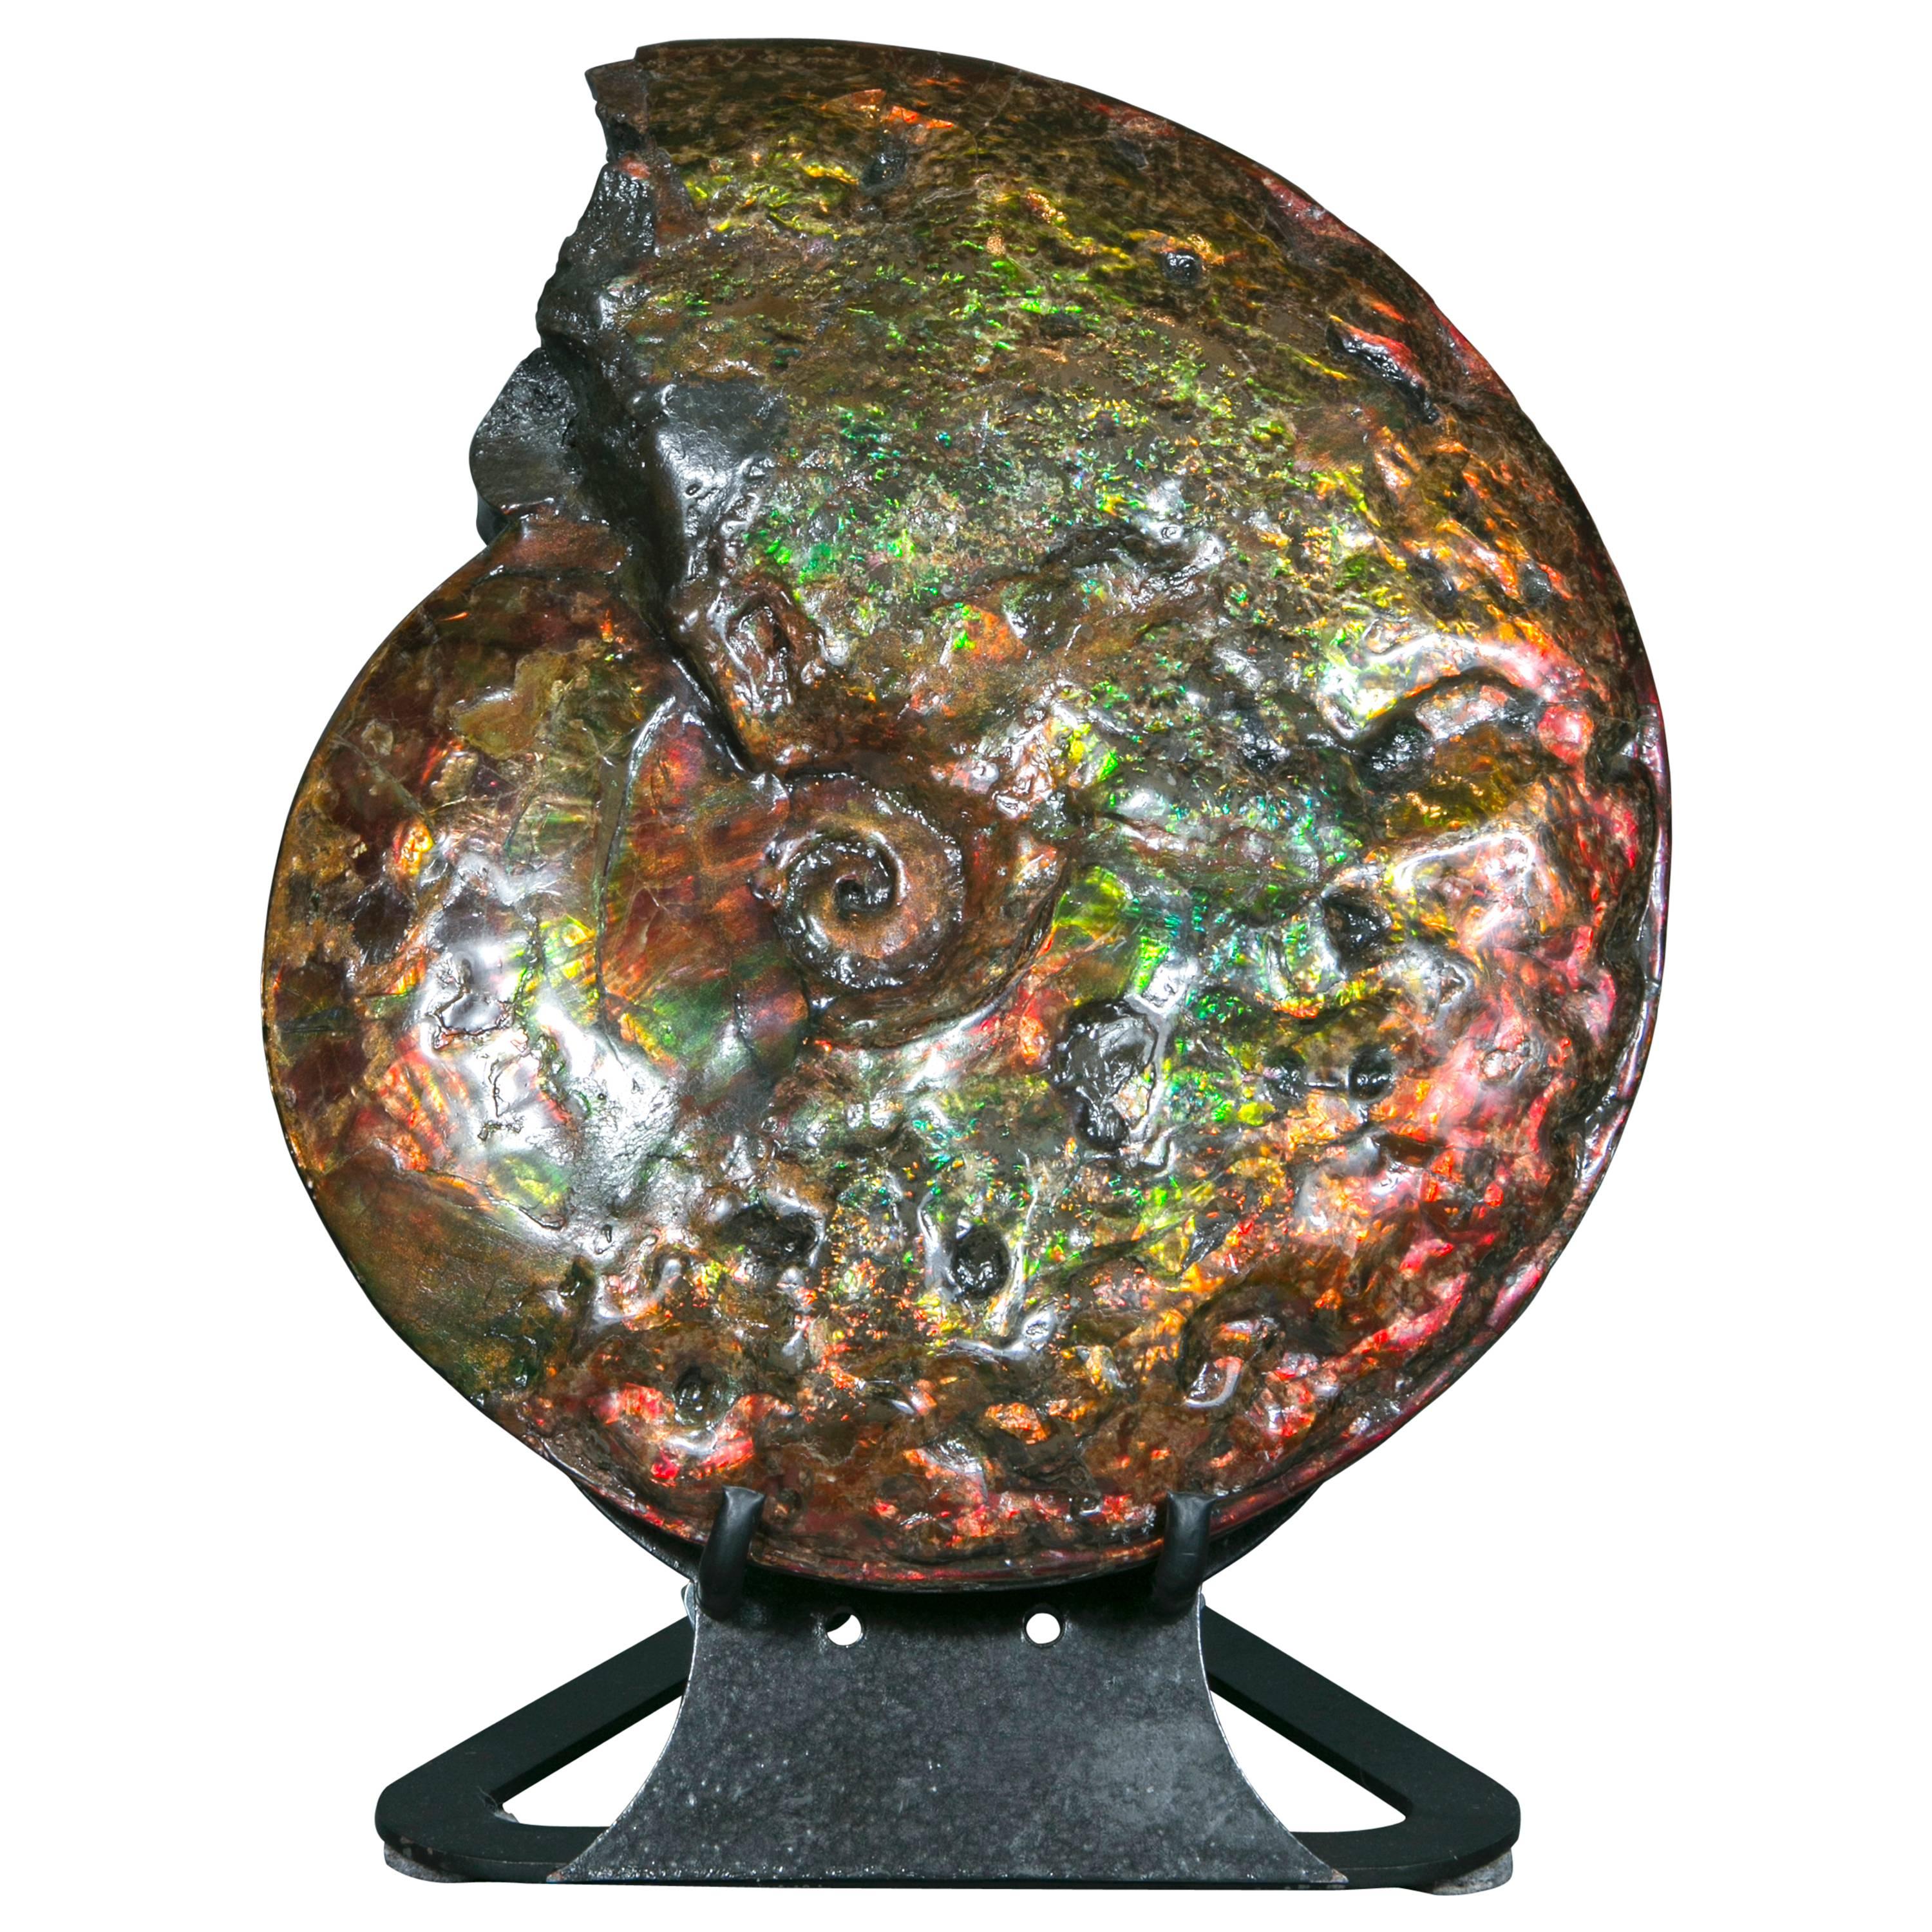 Exceptional Ammonite Fossil from Canada